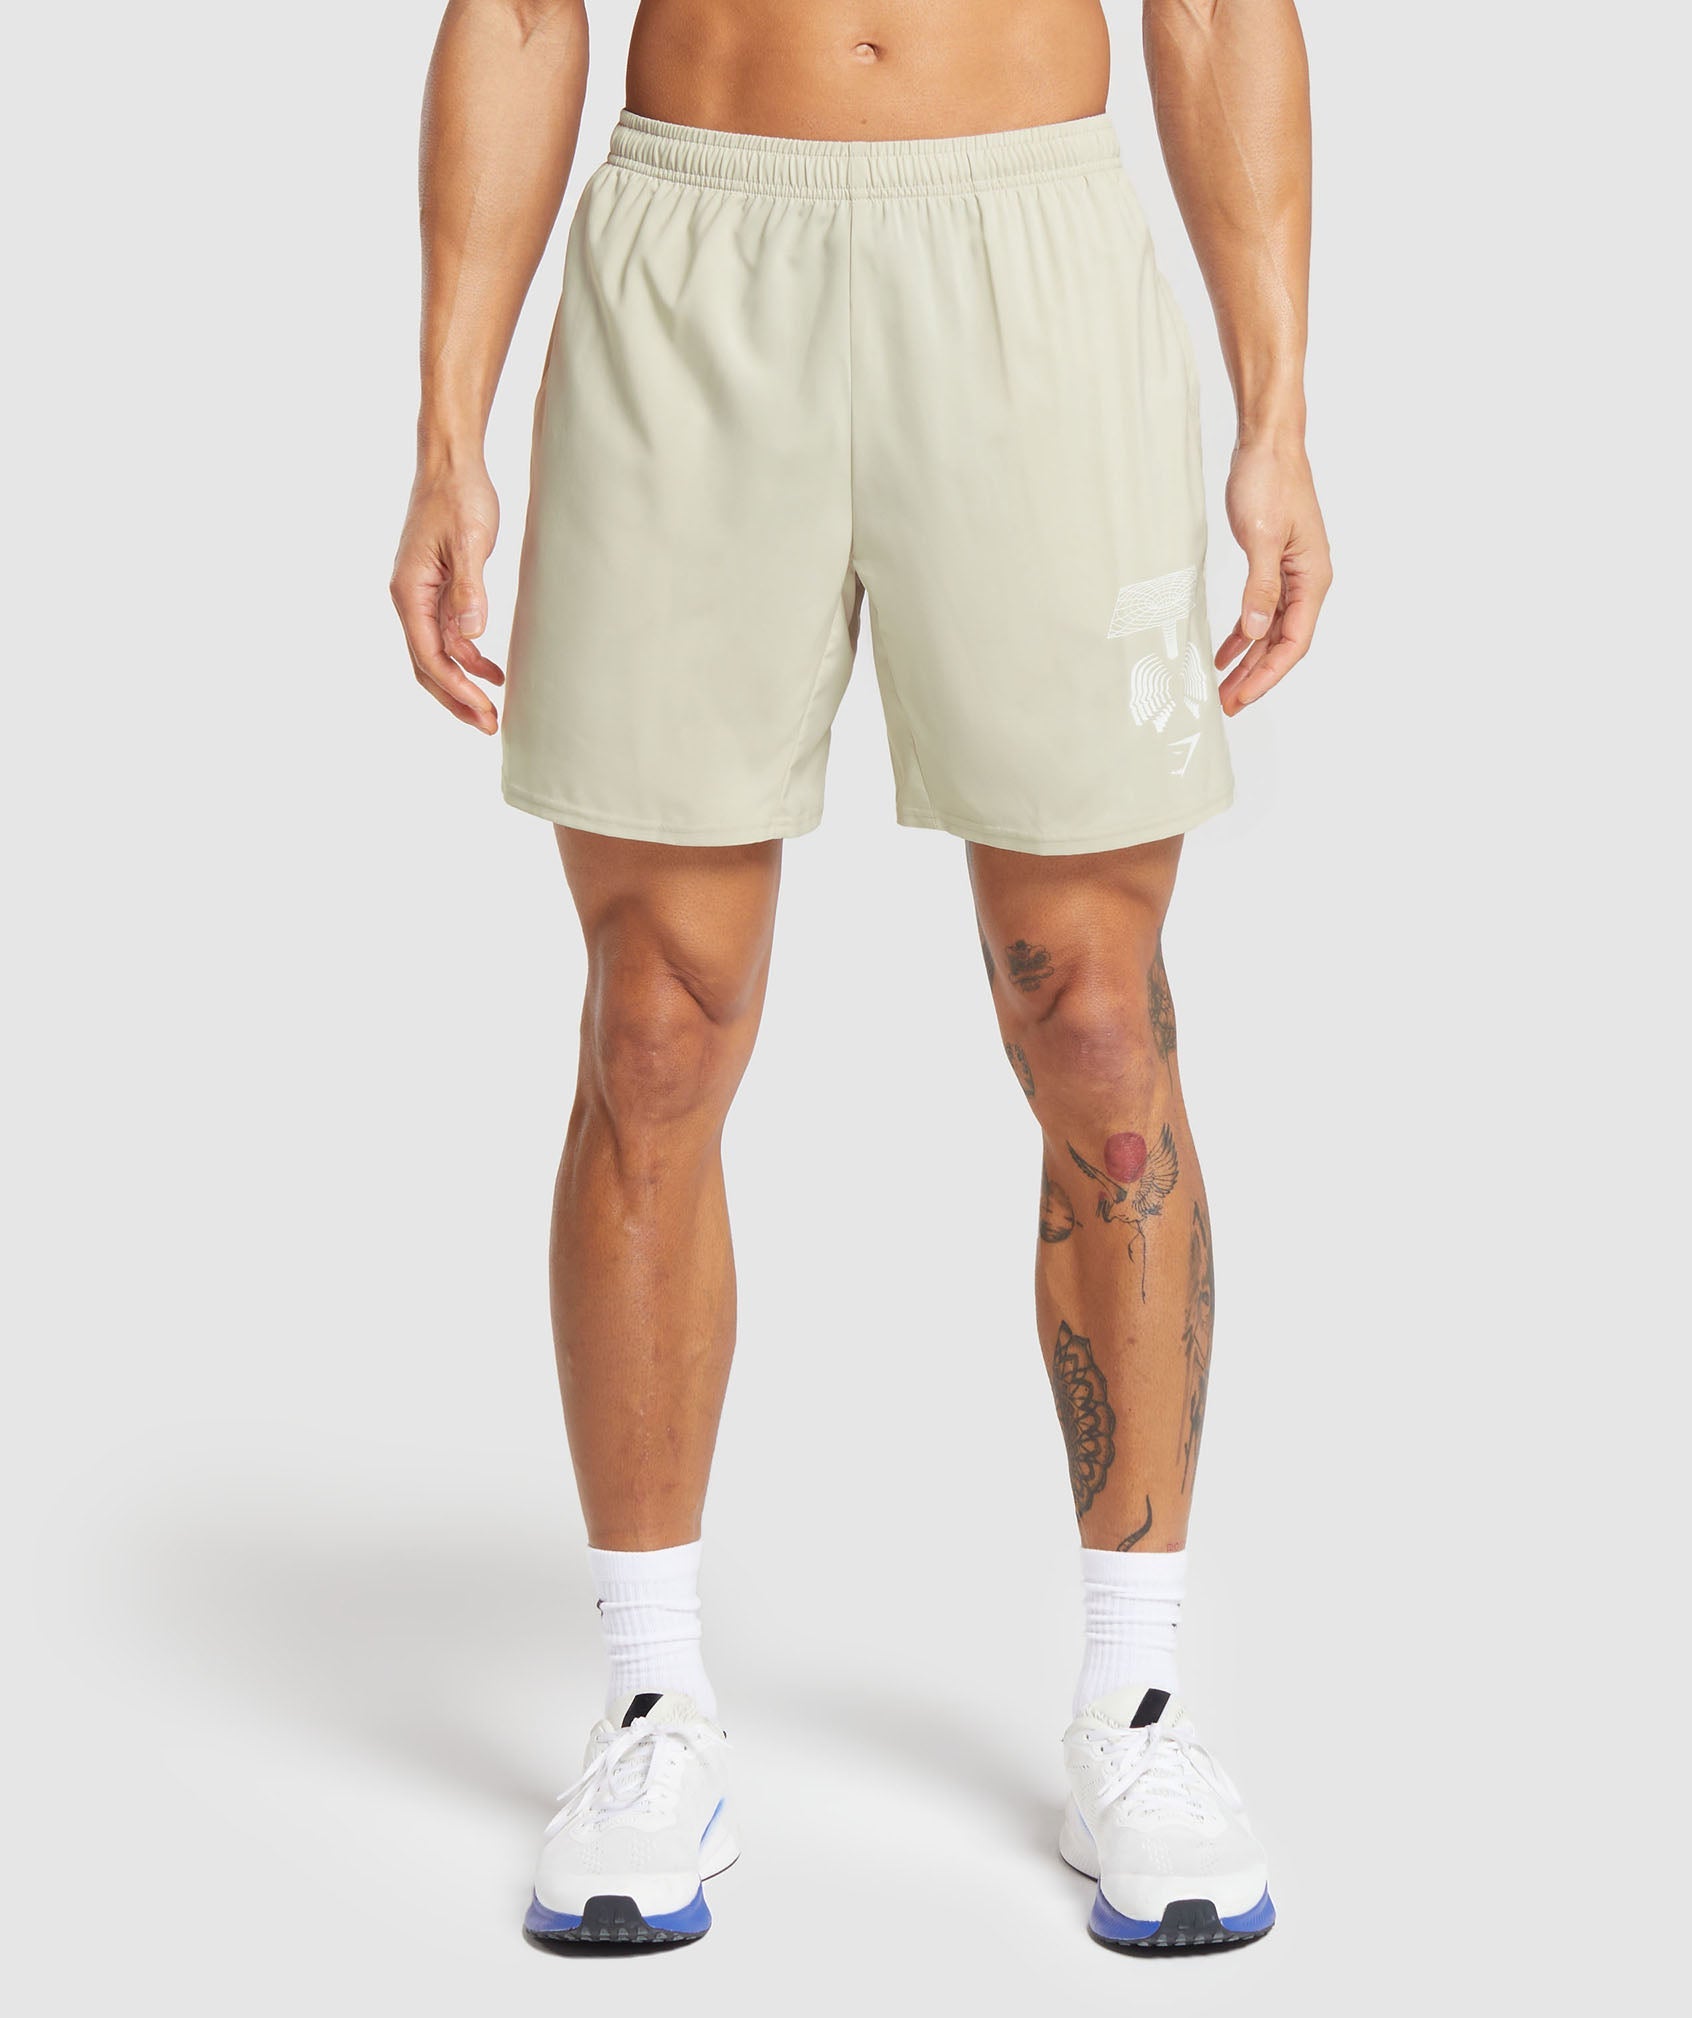 Hybrid Wellness 7" Shorts in Pebble Grey - view 1